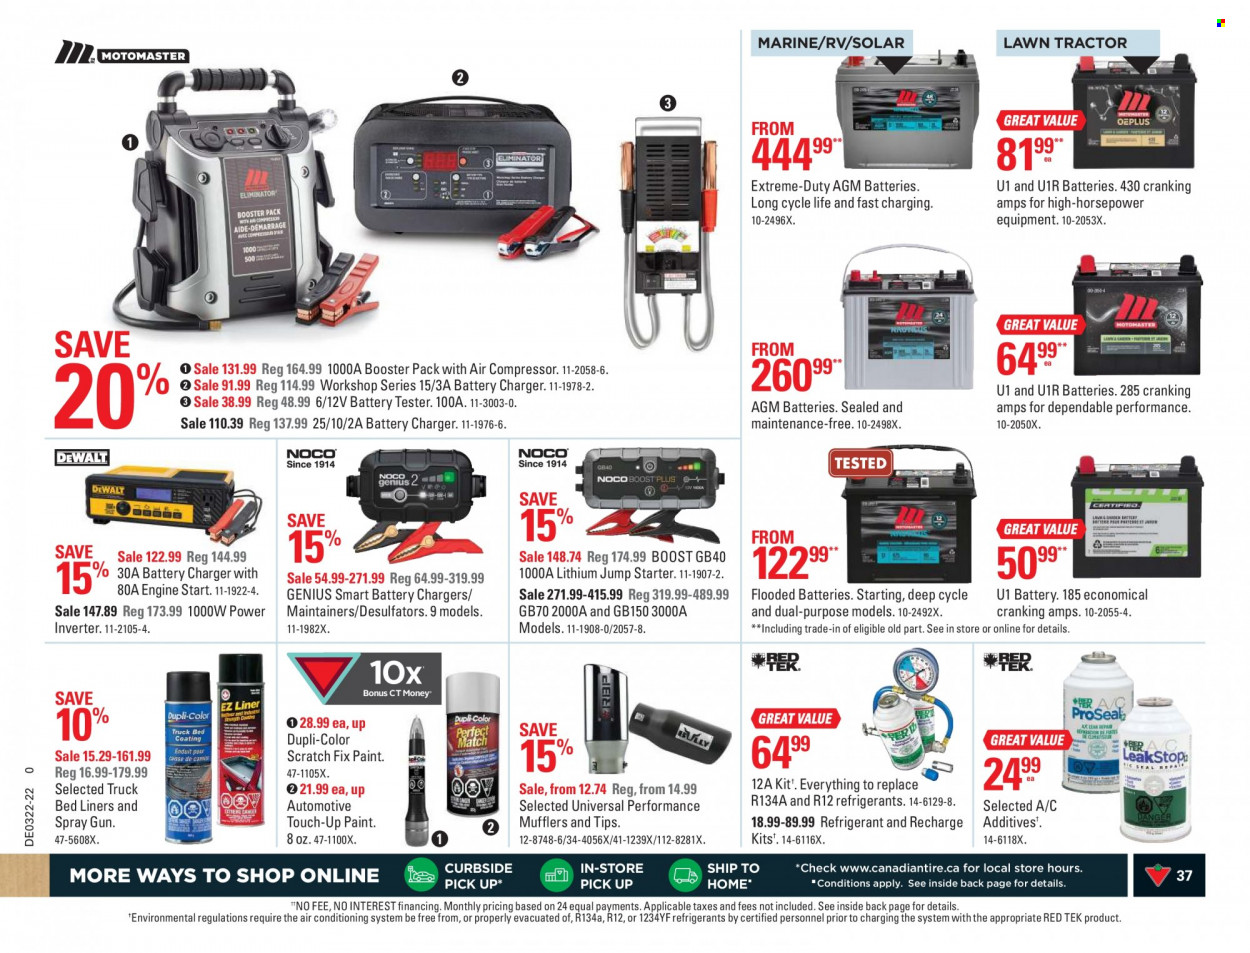 Canadian Tire flyer  - May 27, 2022 - June 02, 2022.